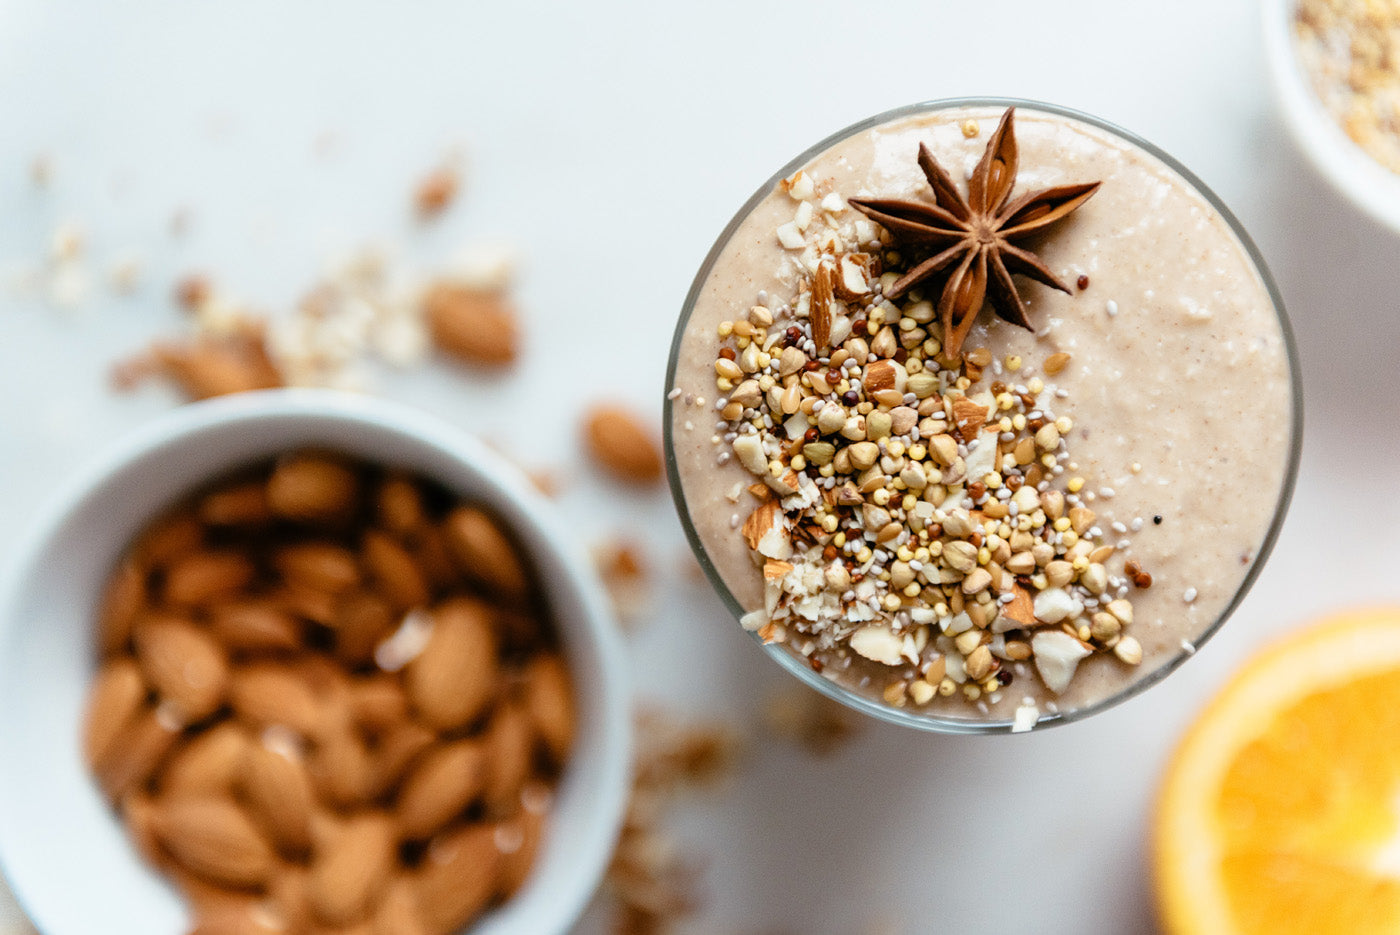 Healthy holiday recipes with a clean protein twist